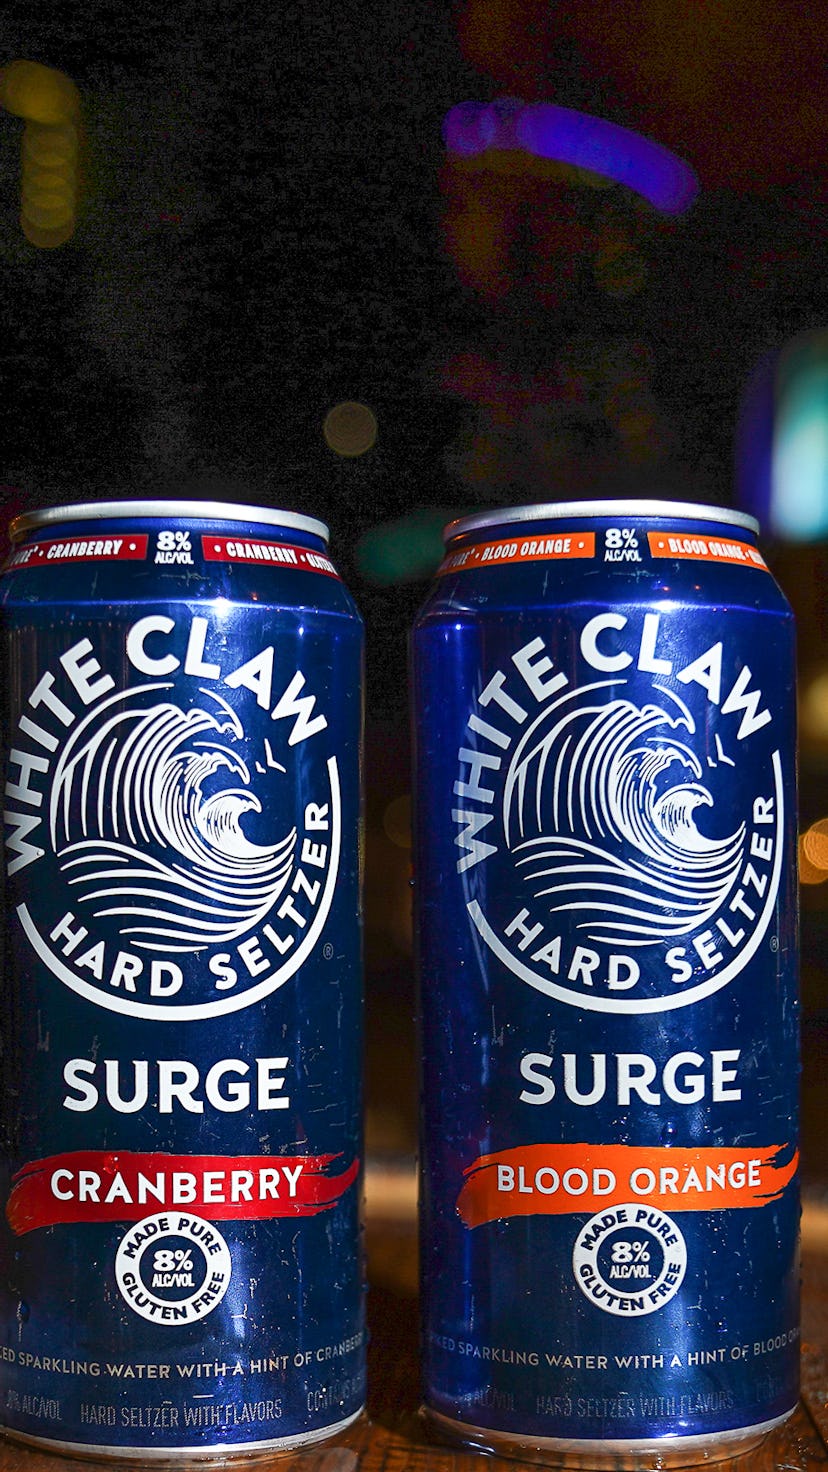 White Claw released a twist on the classic seltzer called White Claw Surge. 